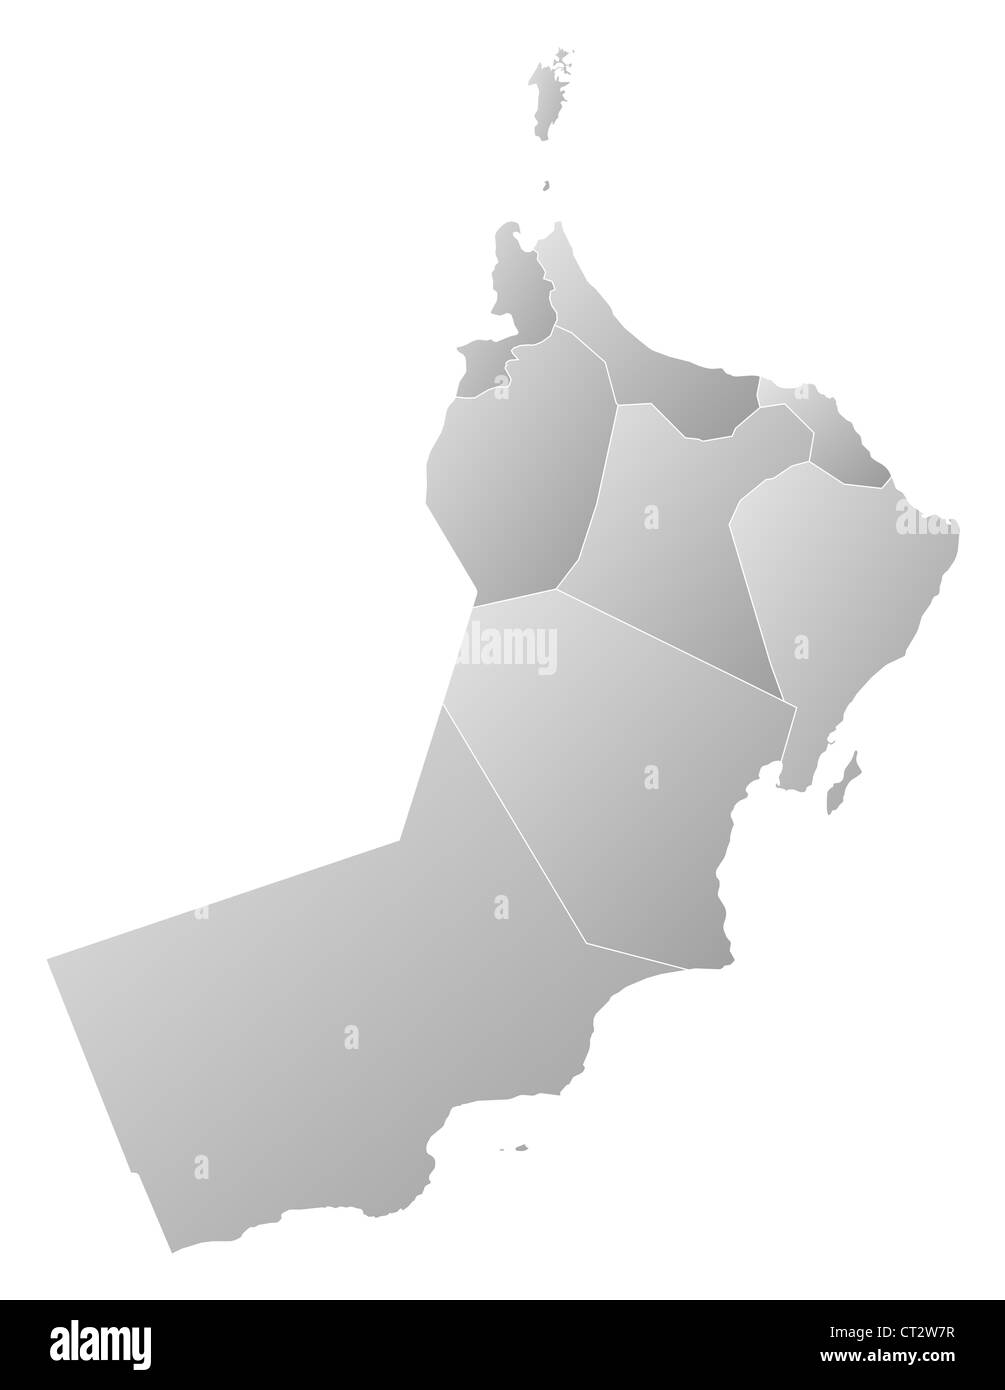 Political map of Oman with the several regions and governorats. Stock Photo